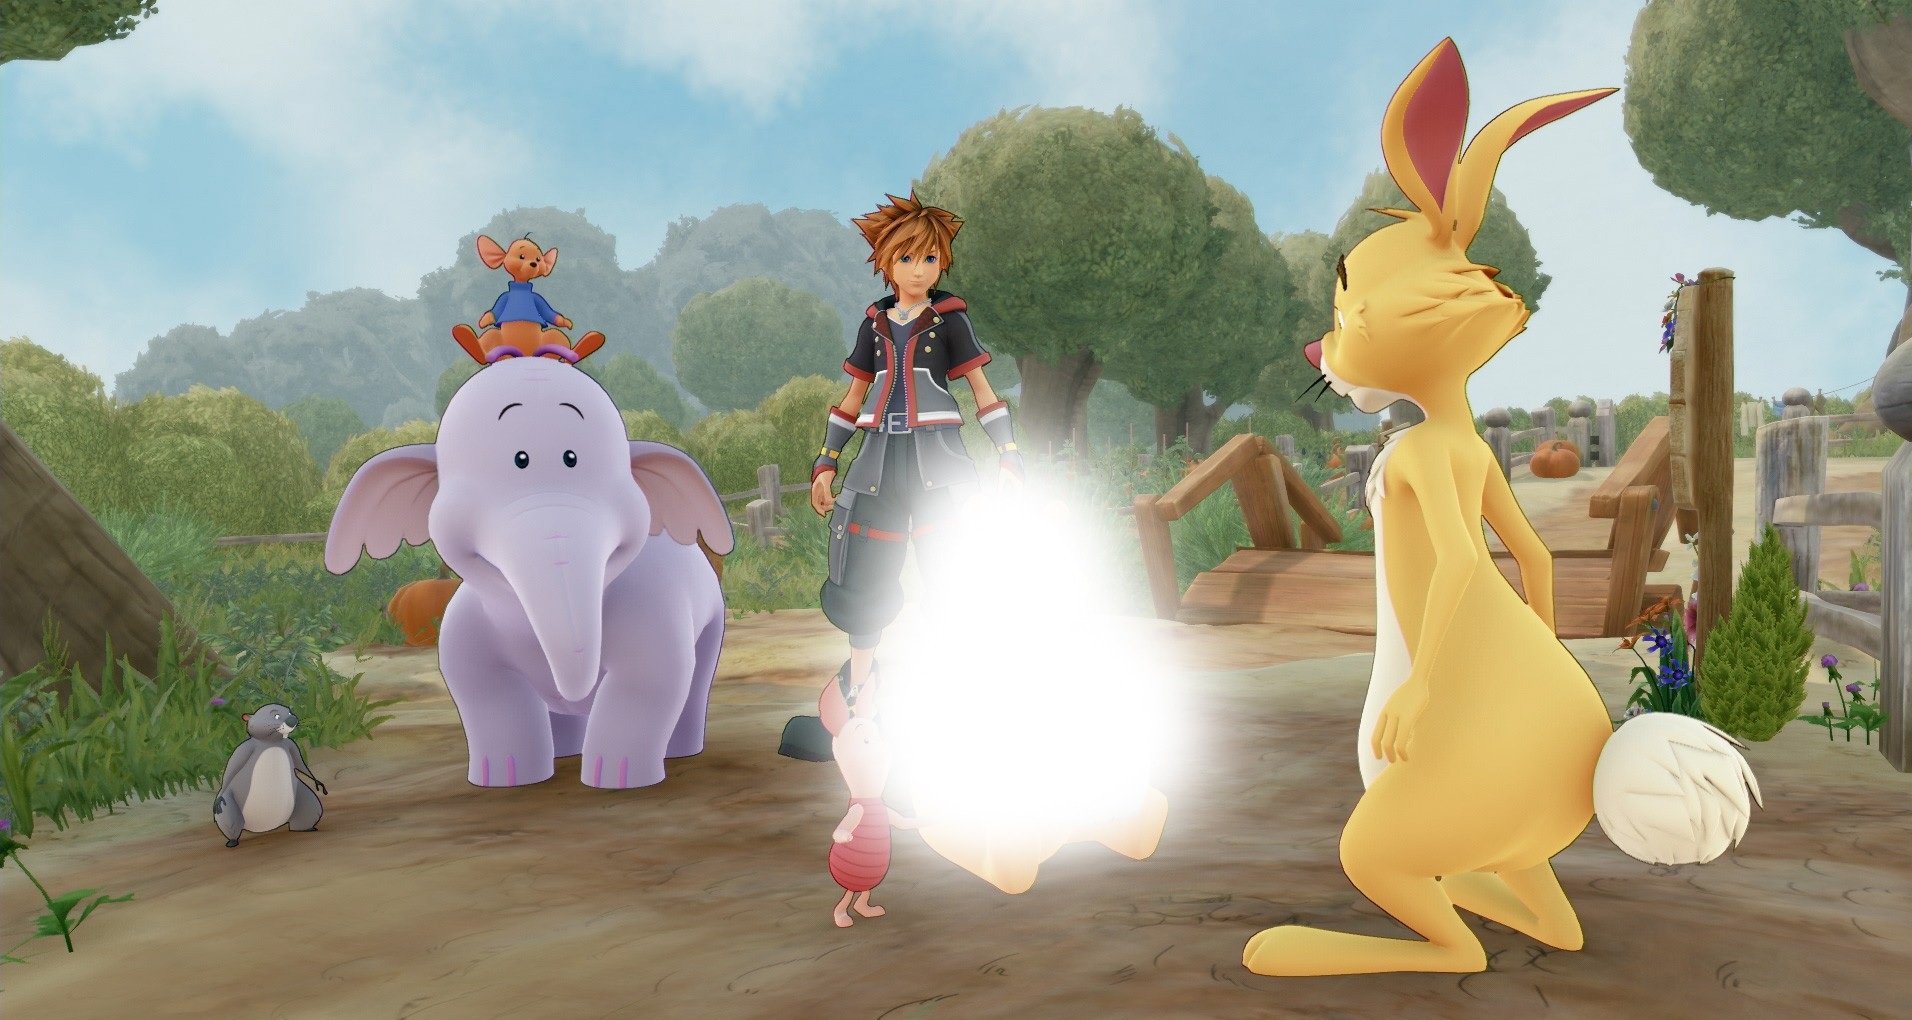 China’s censorship of Kingdom Hearts 3’s Winnie the Pooh is both insane and hilarious